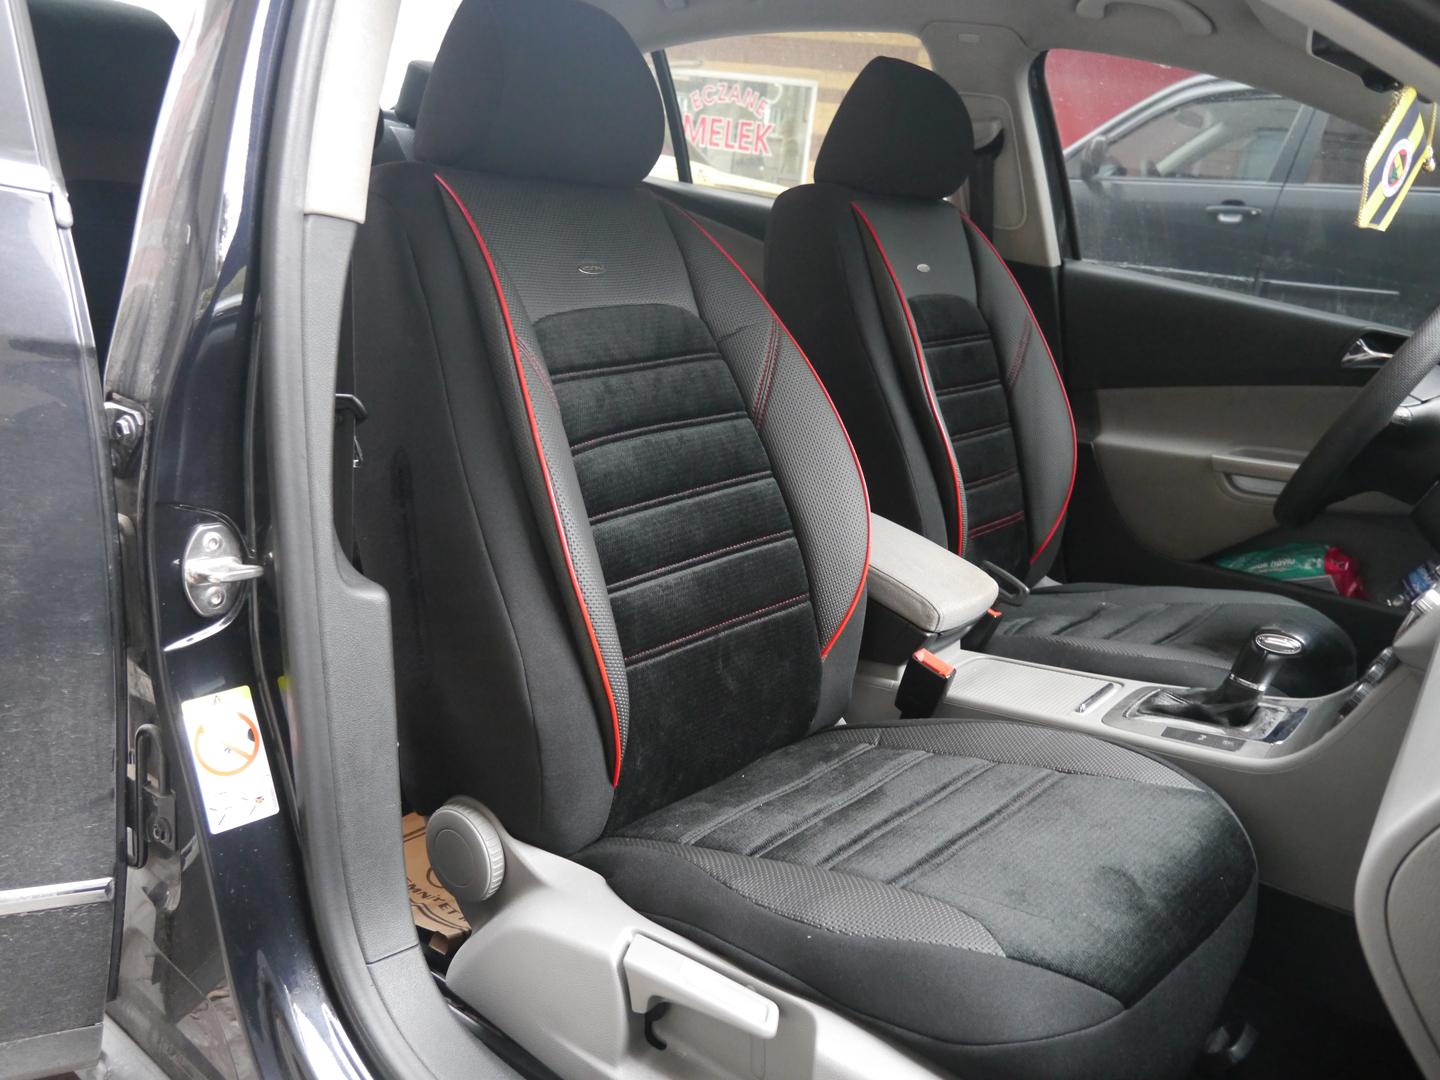 Car seat covers protectors for Ford Fiesta MK IV No4